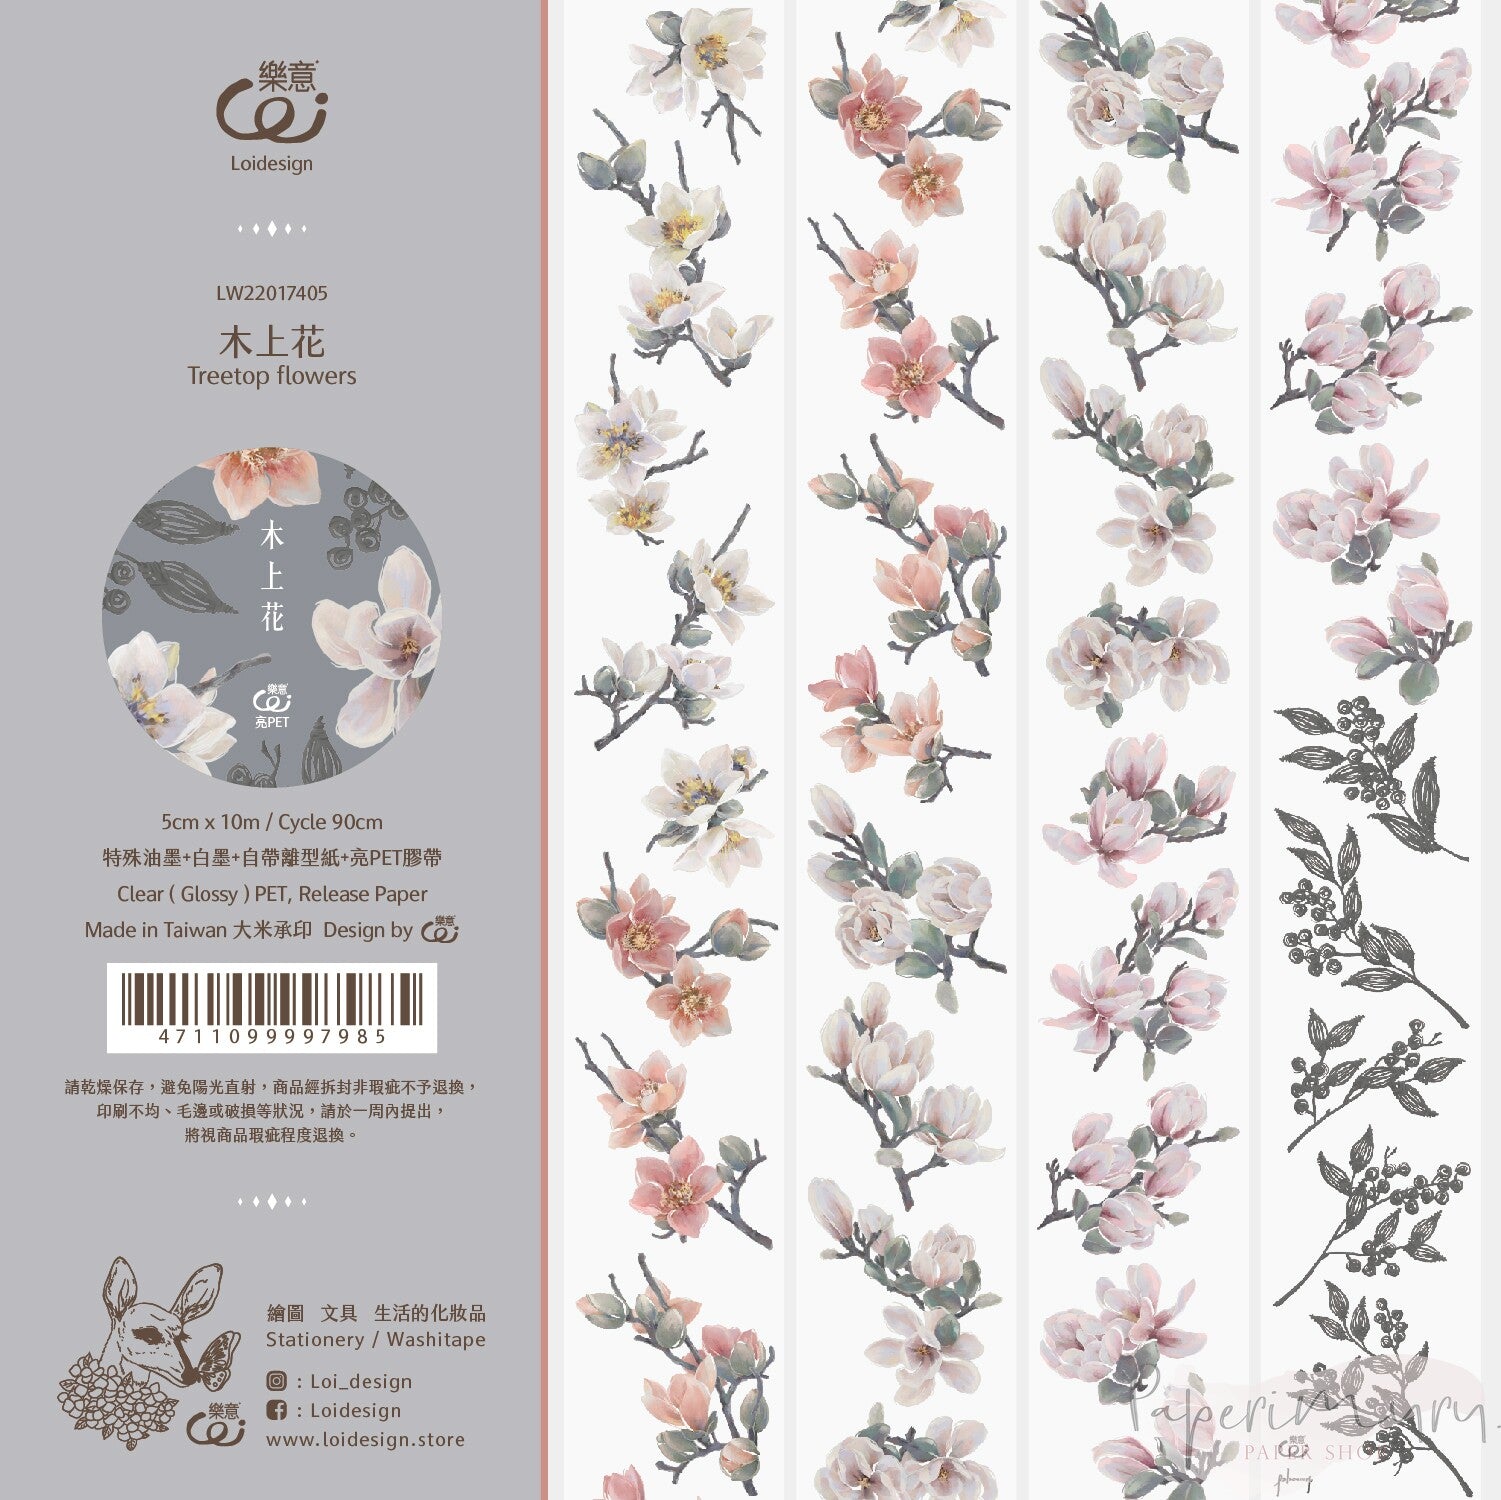 Clear (Glossy) PET Masking Tape 5cm Treetop Flowers